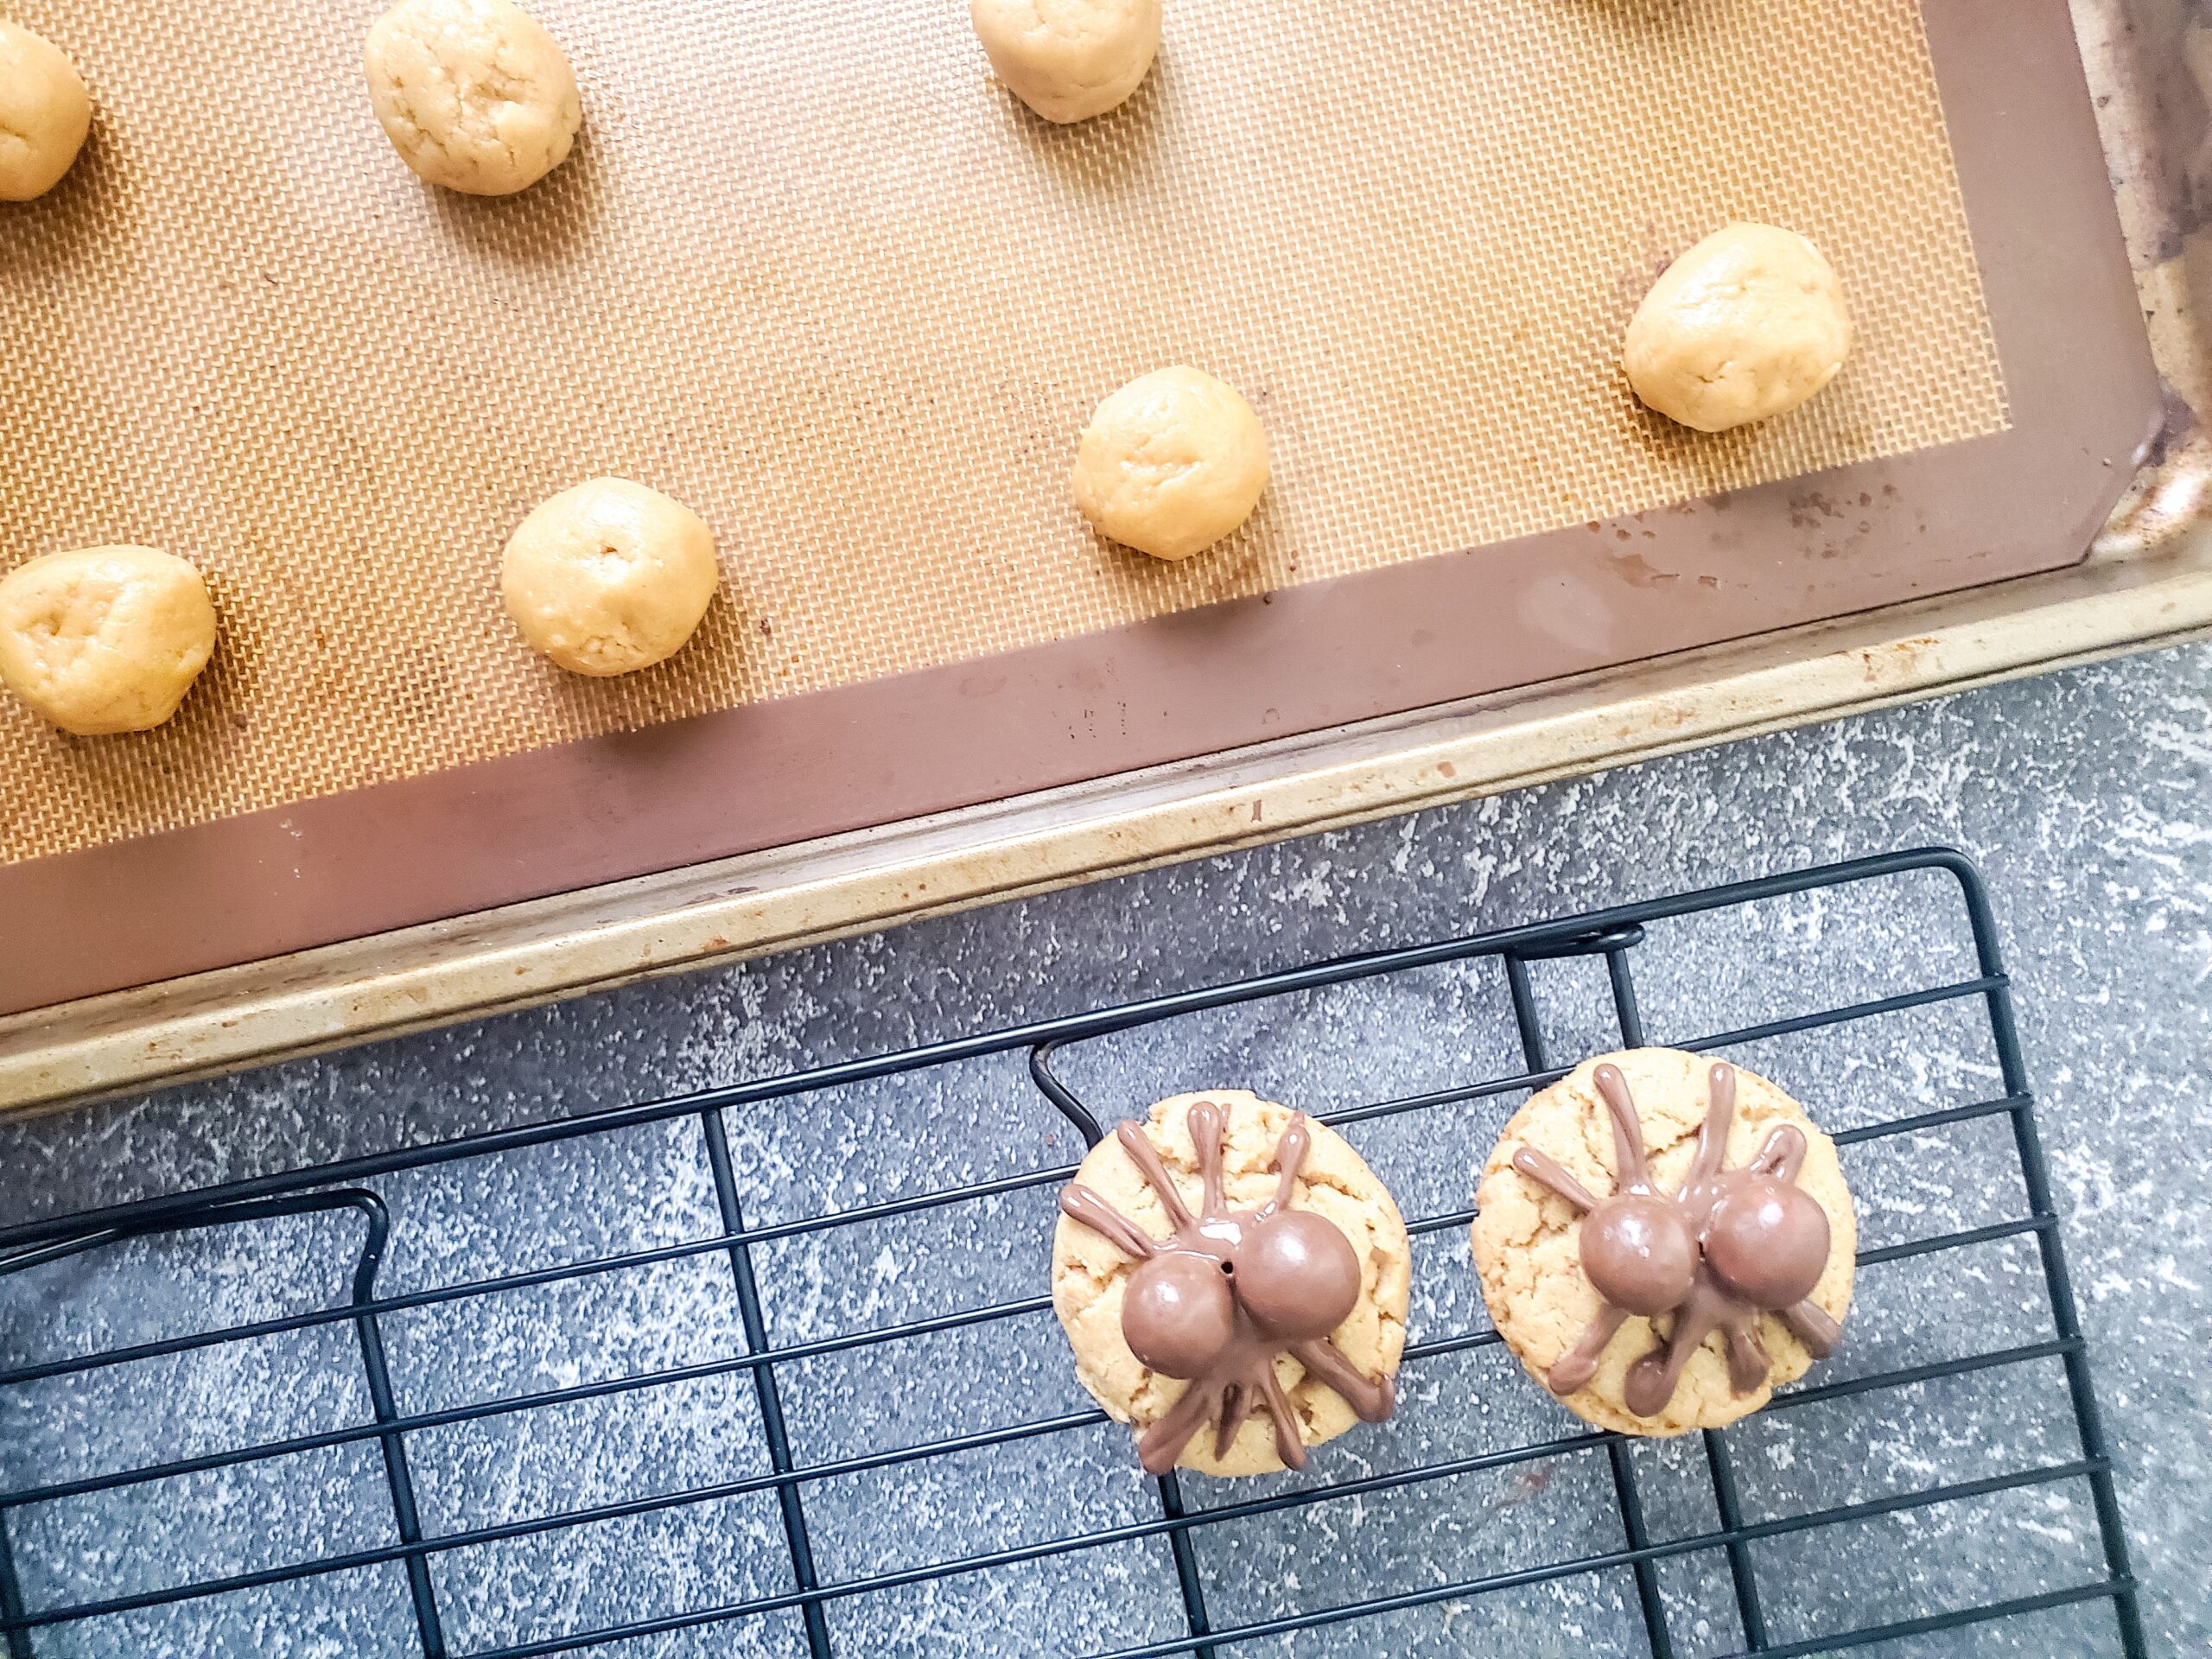 unbaked cookies on a baking sheet and two finished cookies on a cooling rack